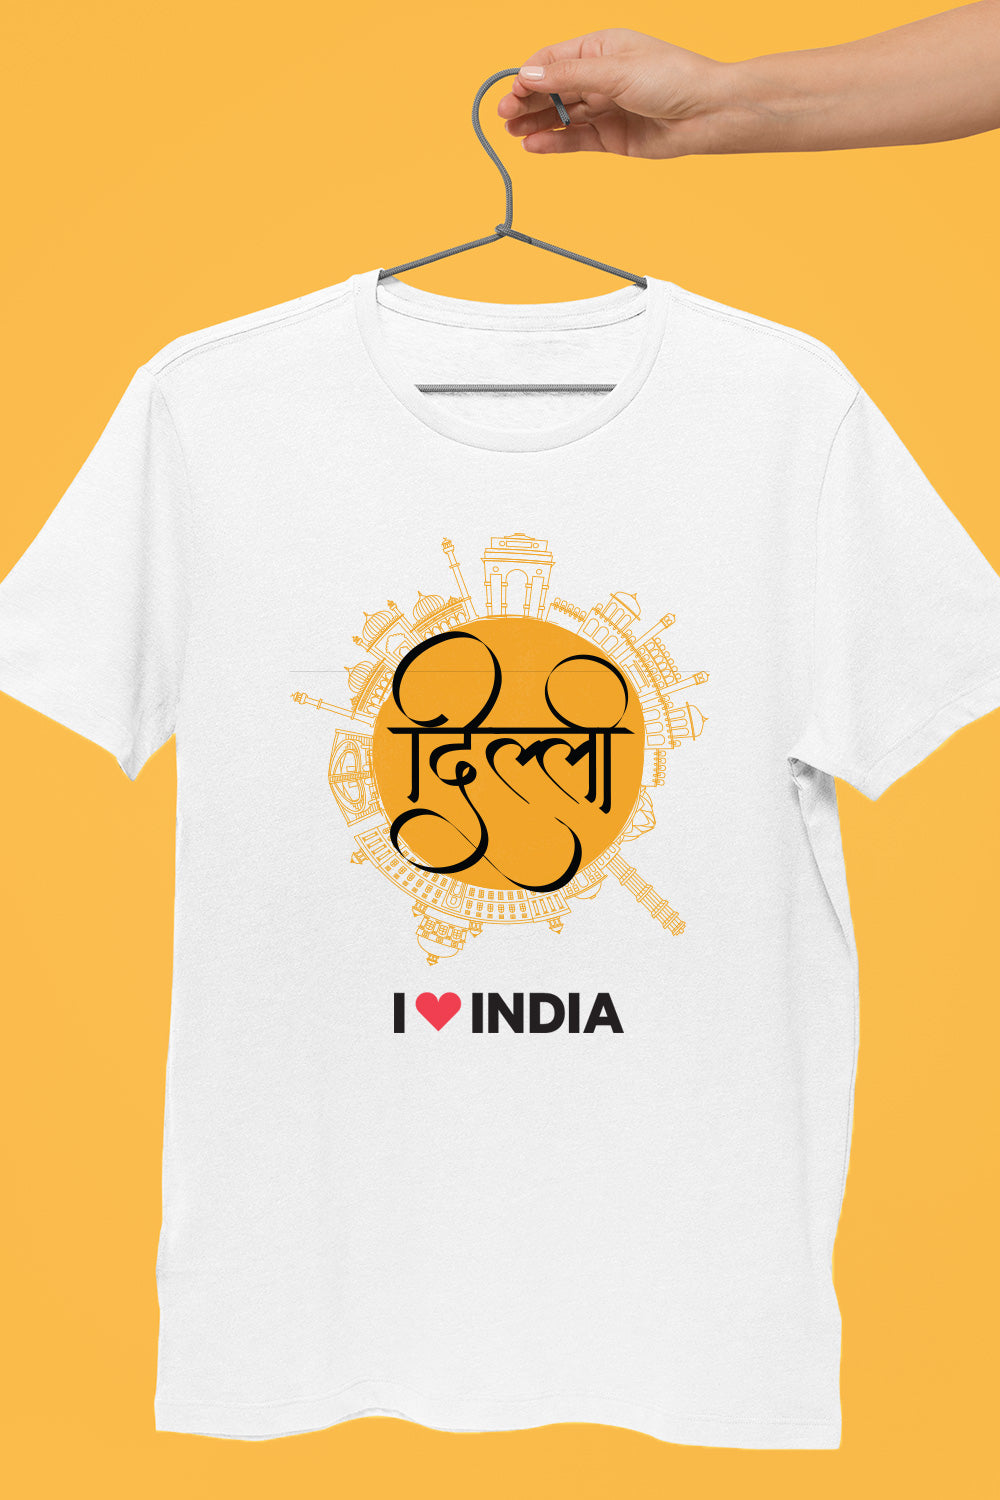 Delhi Hindi- Styched in India Graphic T-Shirt White Color